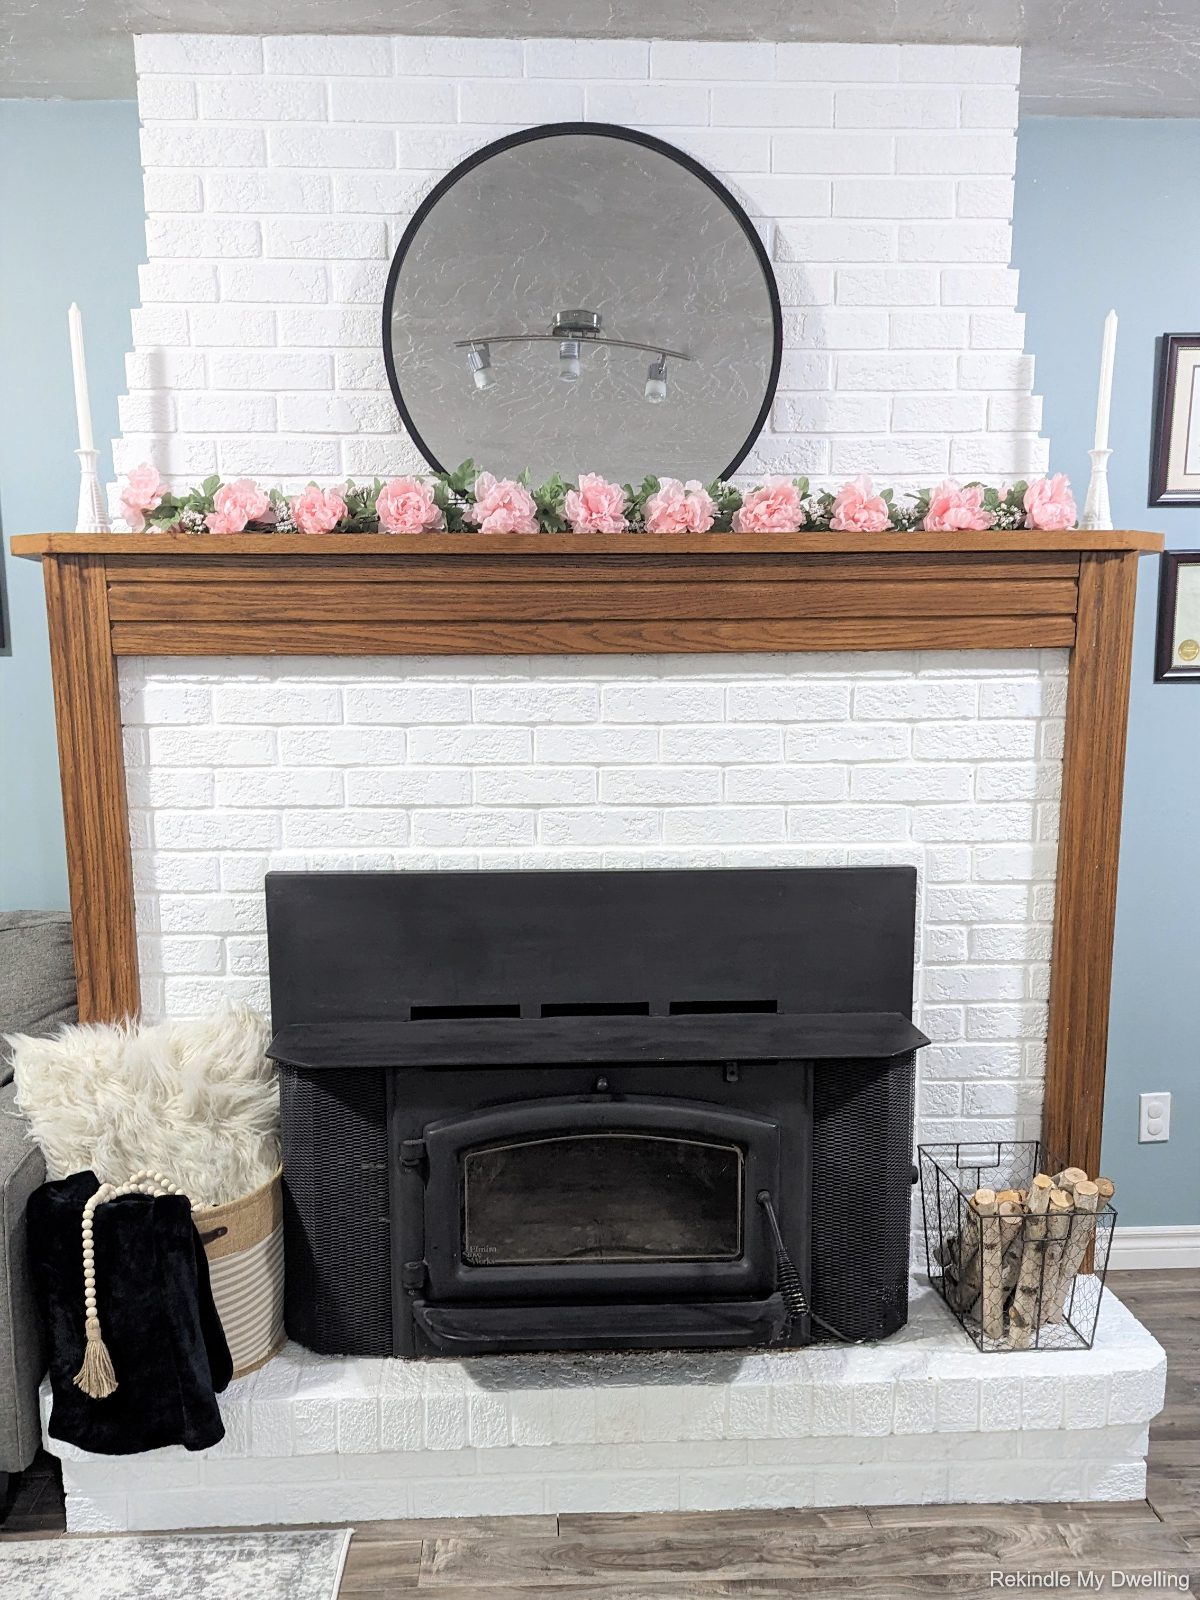 Simple spring mantel inspiration with flowers, candles and a basket.